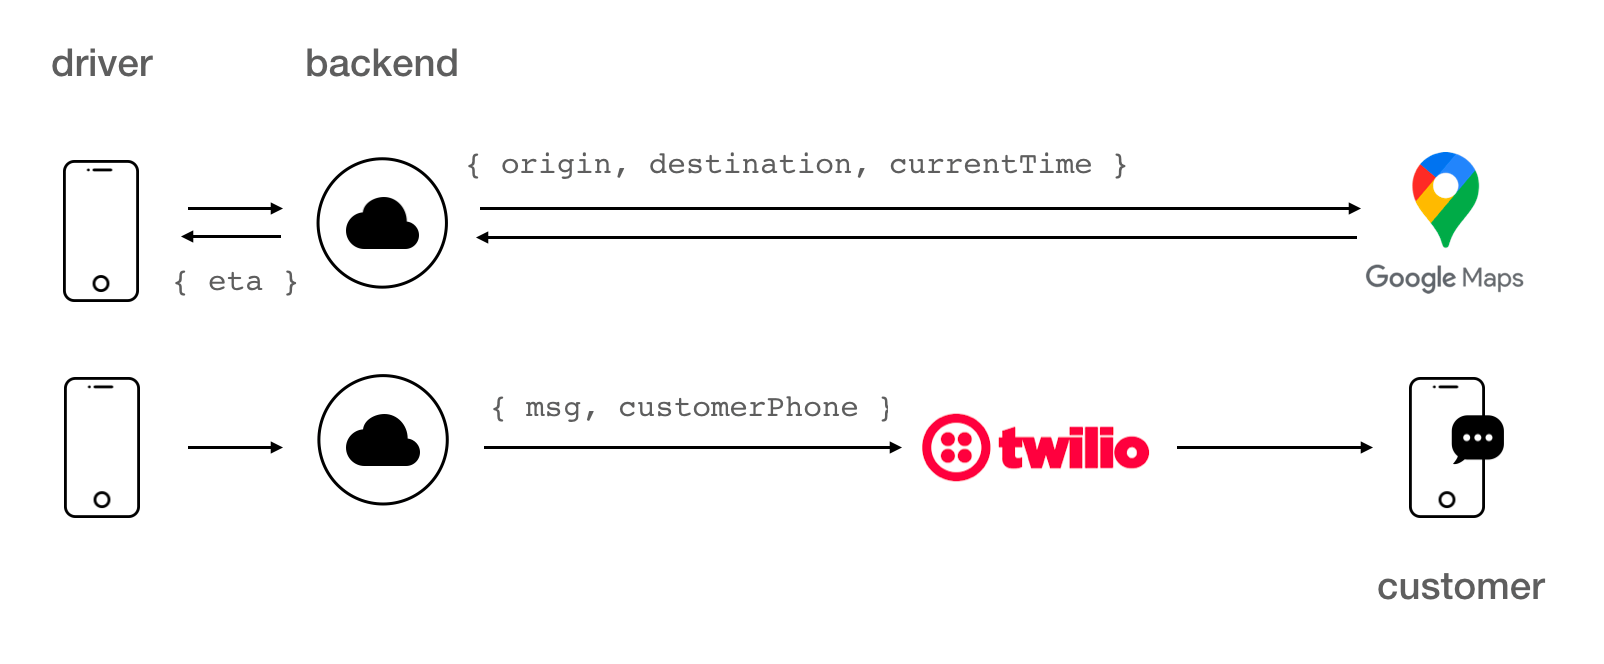 twilio customer notifications system architecture for real time etas from google maps